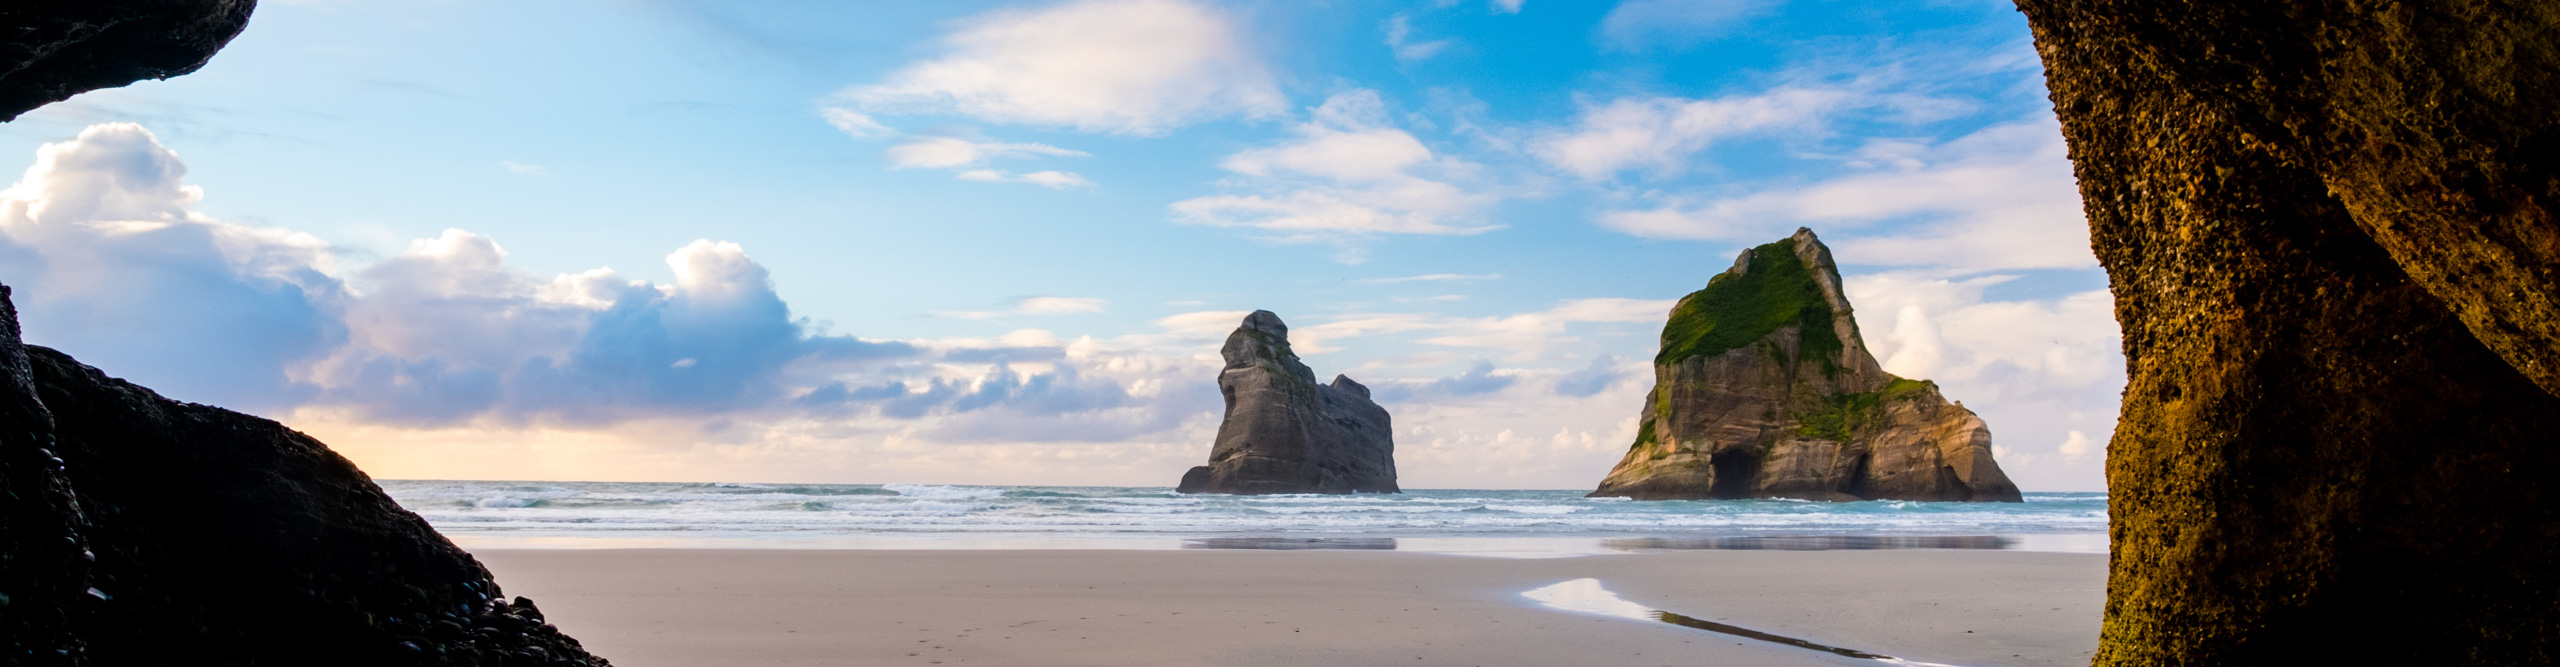 The beautiful Wharariki Beach with famous rocks at Sunset, Nelson, South Island, New Zealand.